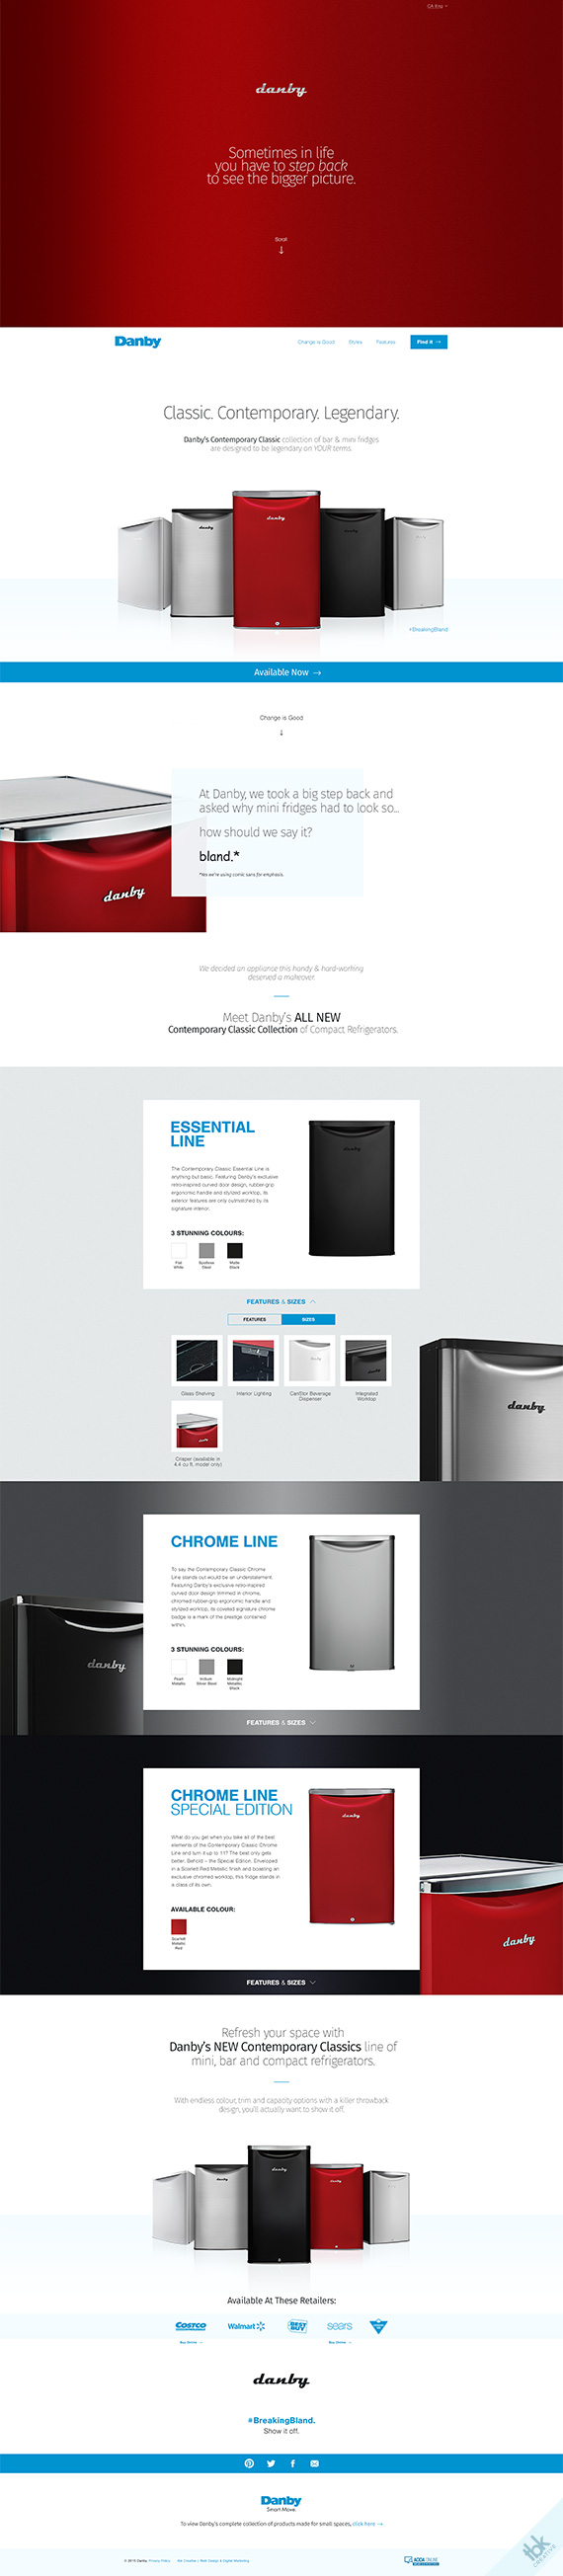 Product launch page